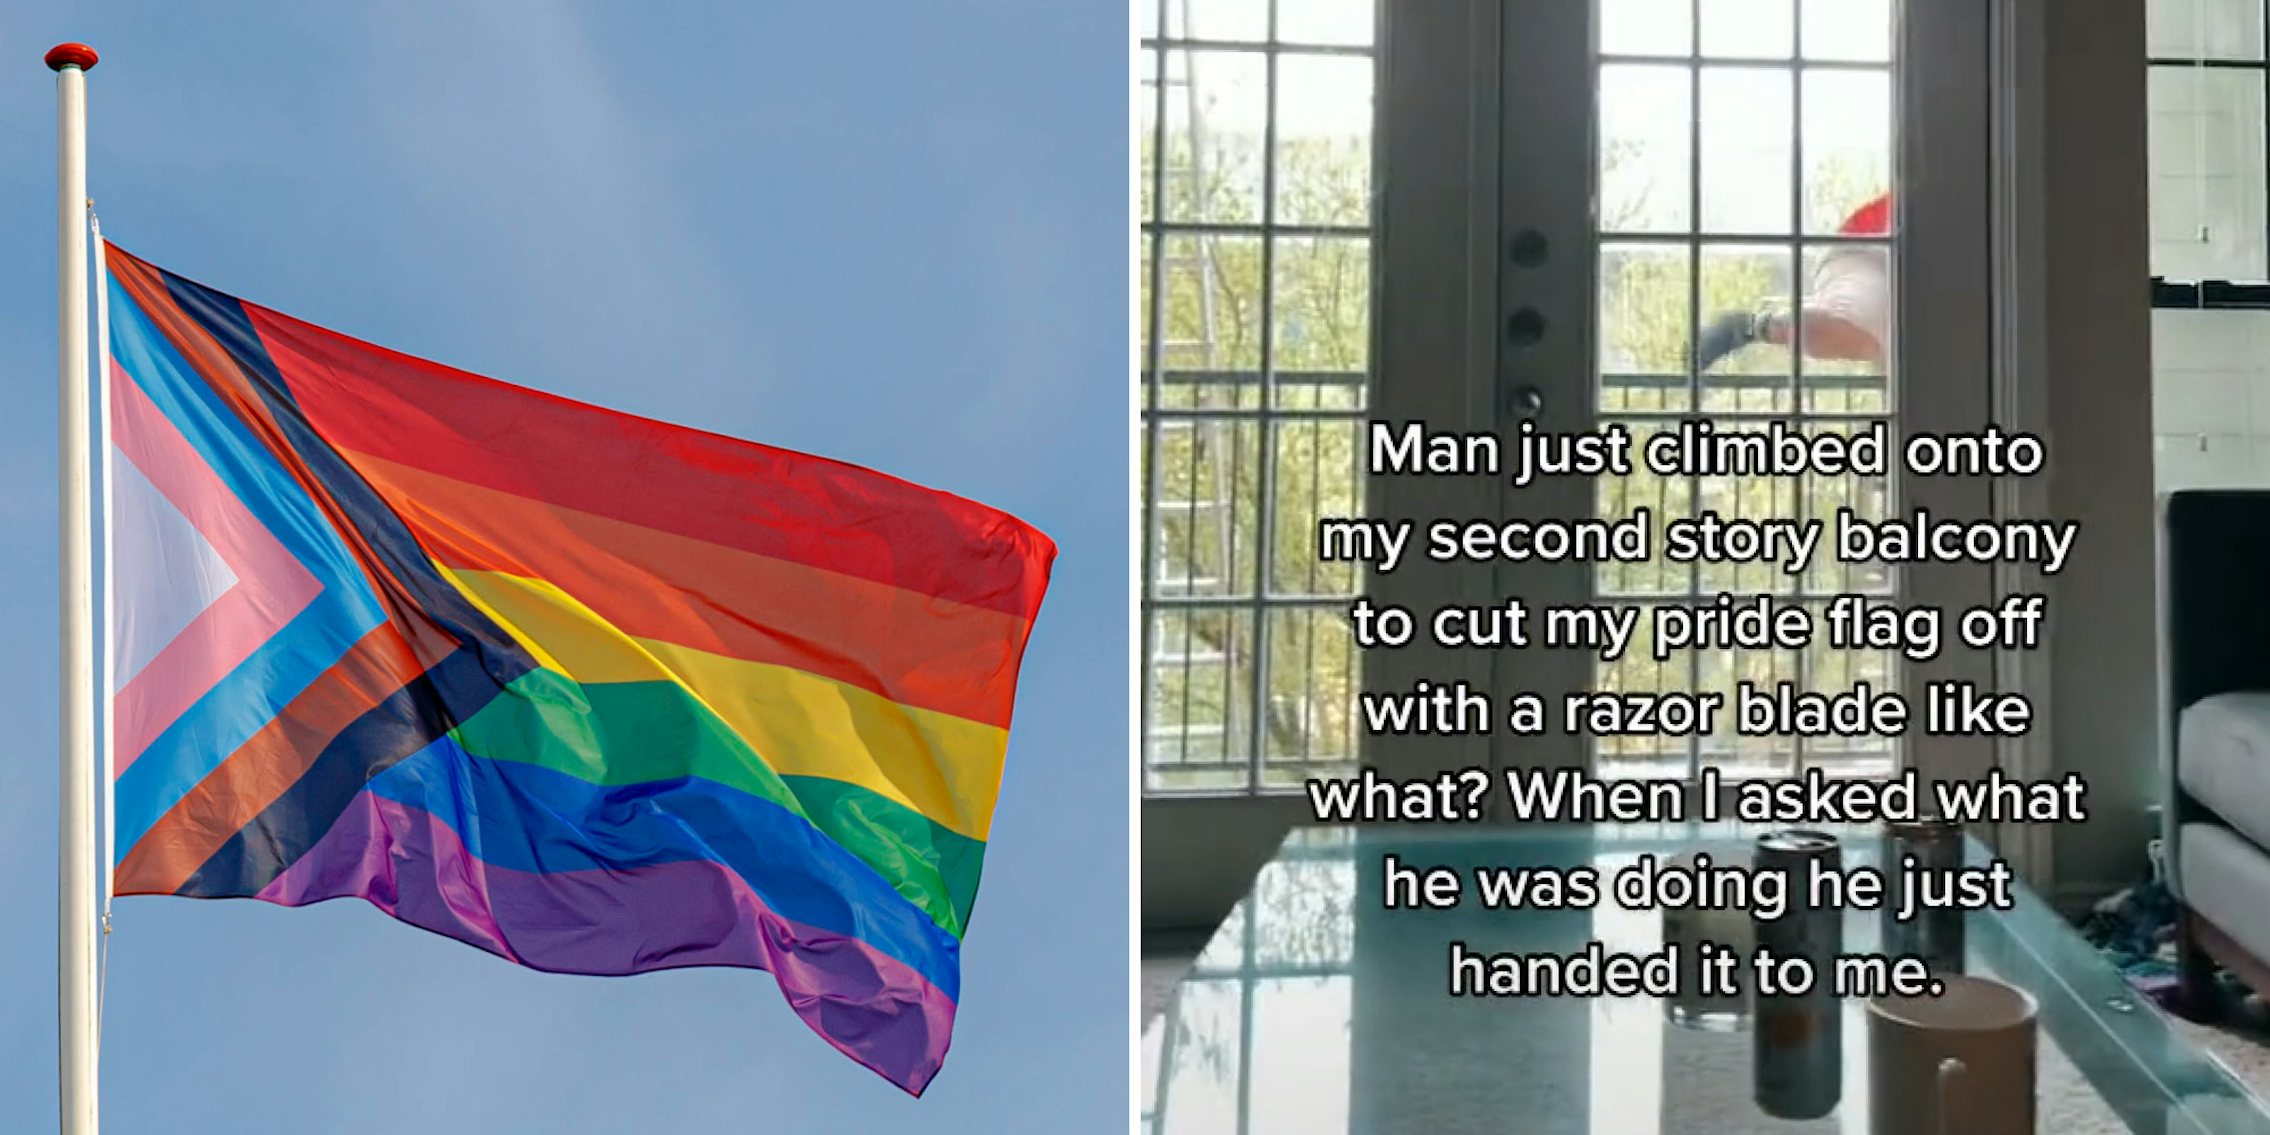 Updated pride flag in sky (l) Woman in house man climbing balcony caption 'Man just climbed onto my second story balcony to cut my pride flag off with a razor blade like what? When I asked what he was doing he just handed it to me.' (r)